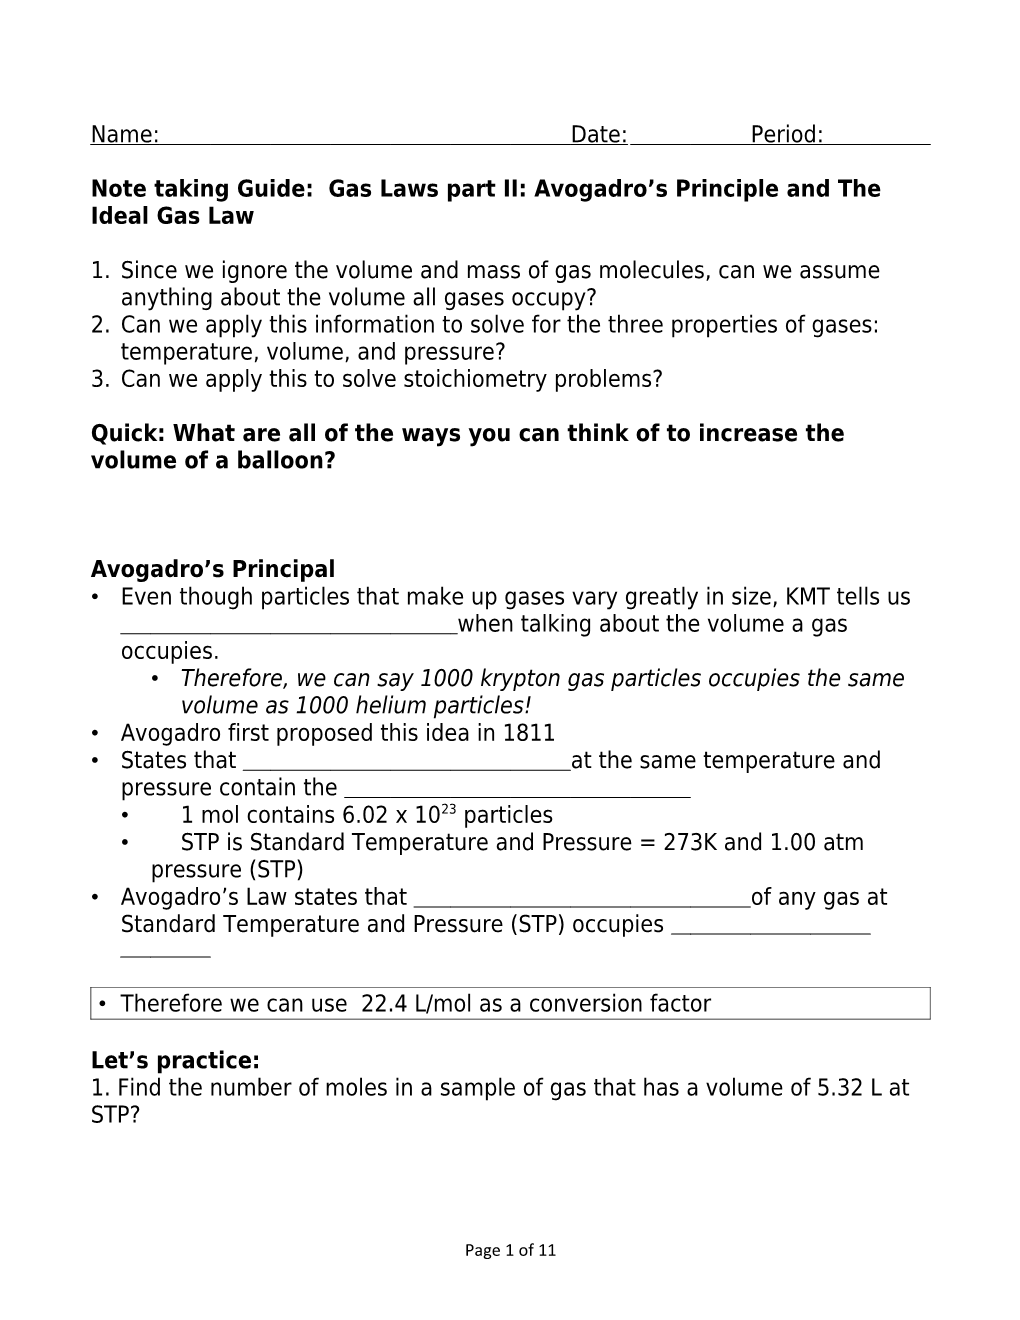 Note Taking Guide: Gas Laws Part II: Avogadro S Principle and the Ideal Gas Law